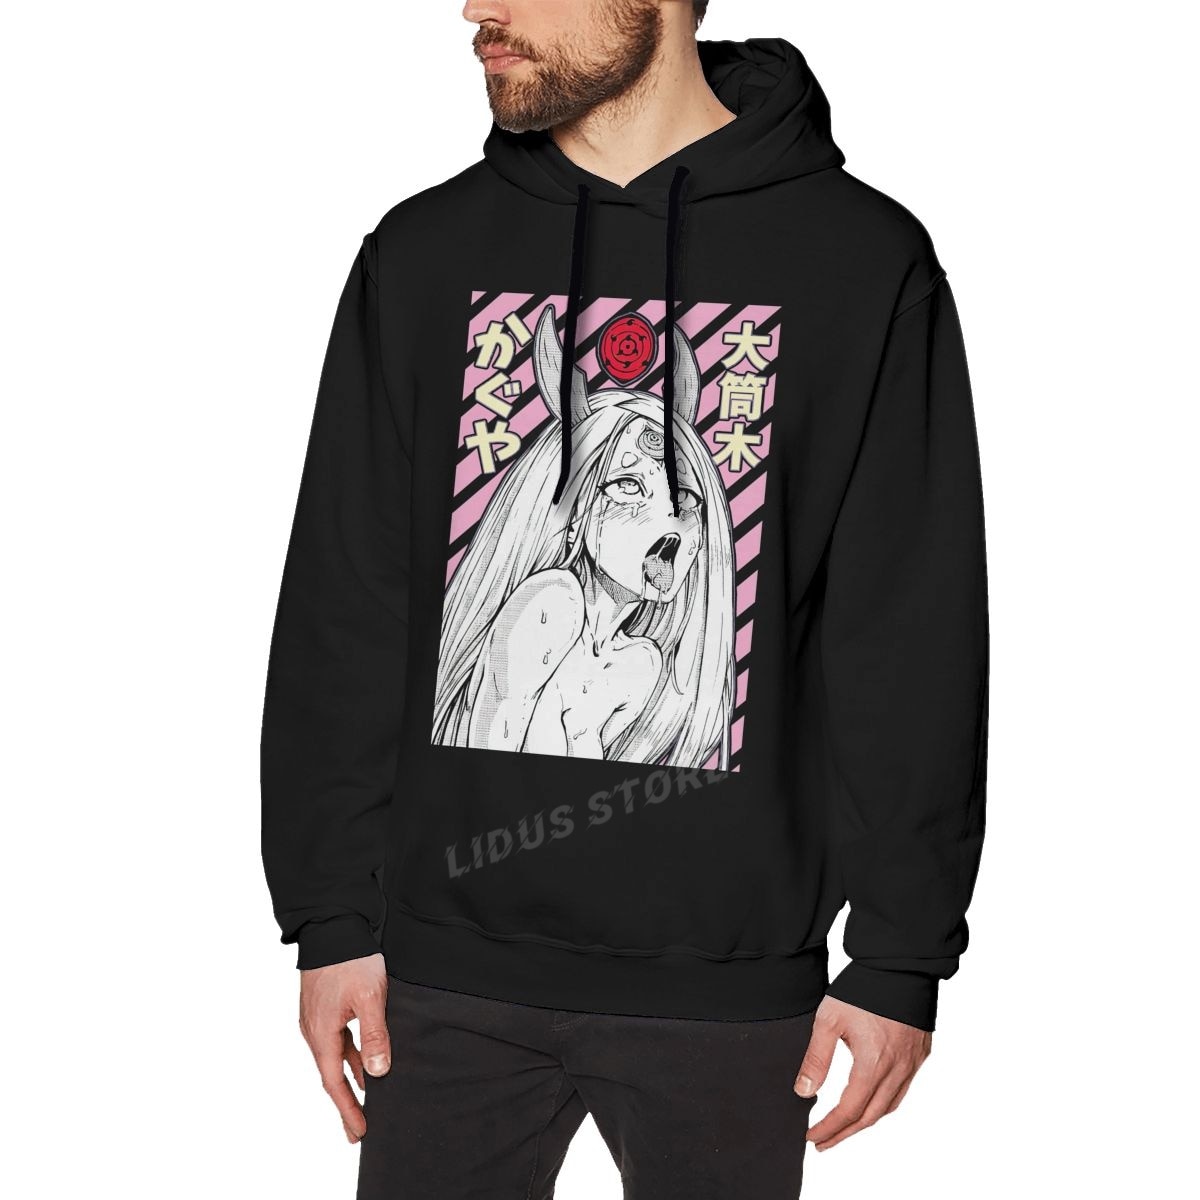 Are You Embarrassed By Your Ahegao Face Hoodie Skills?